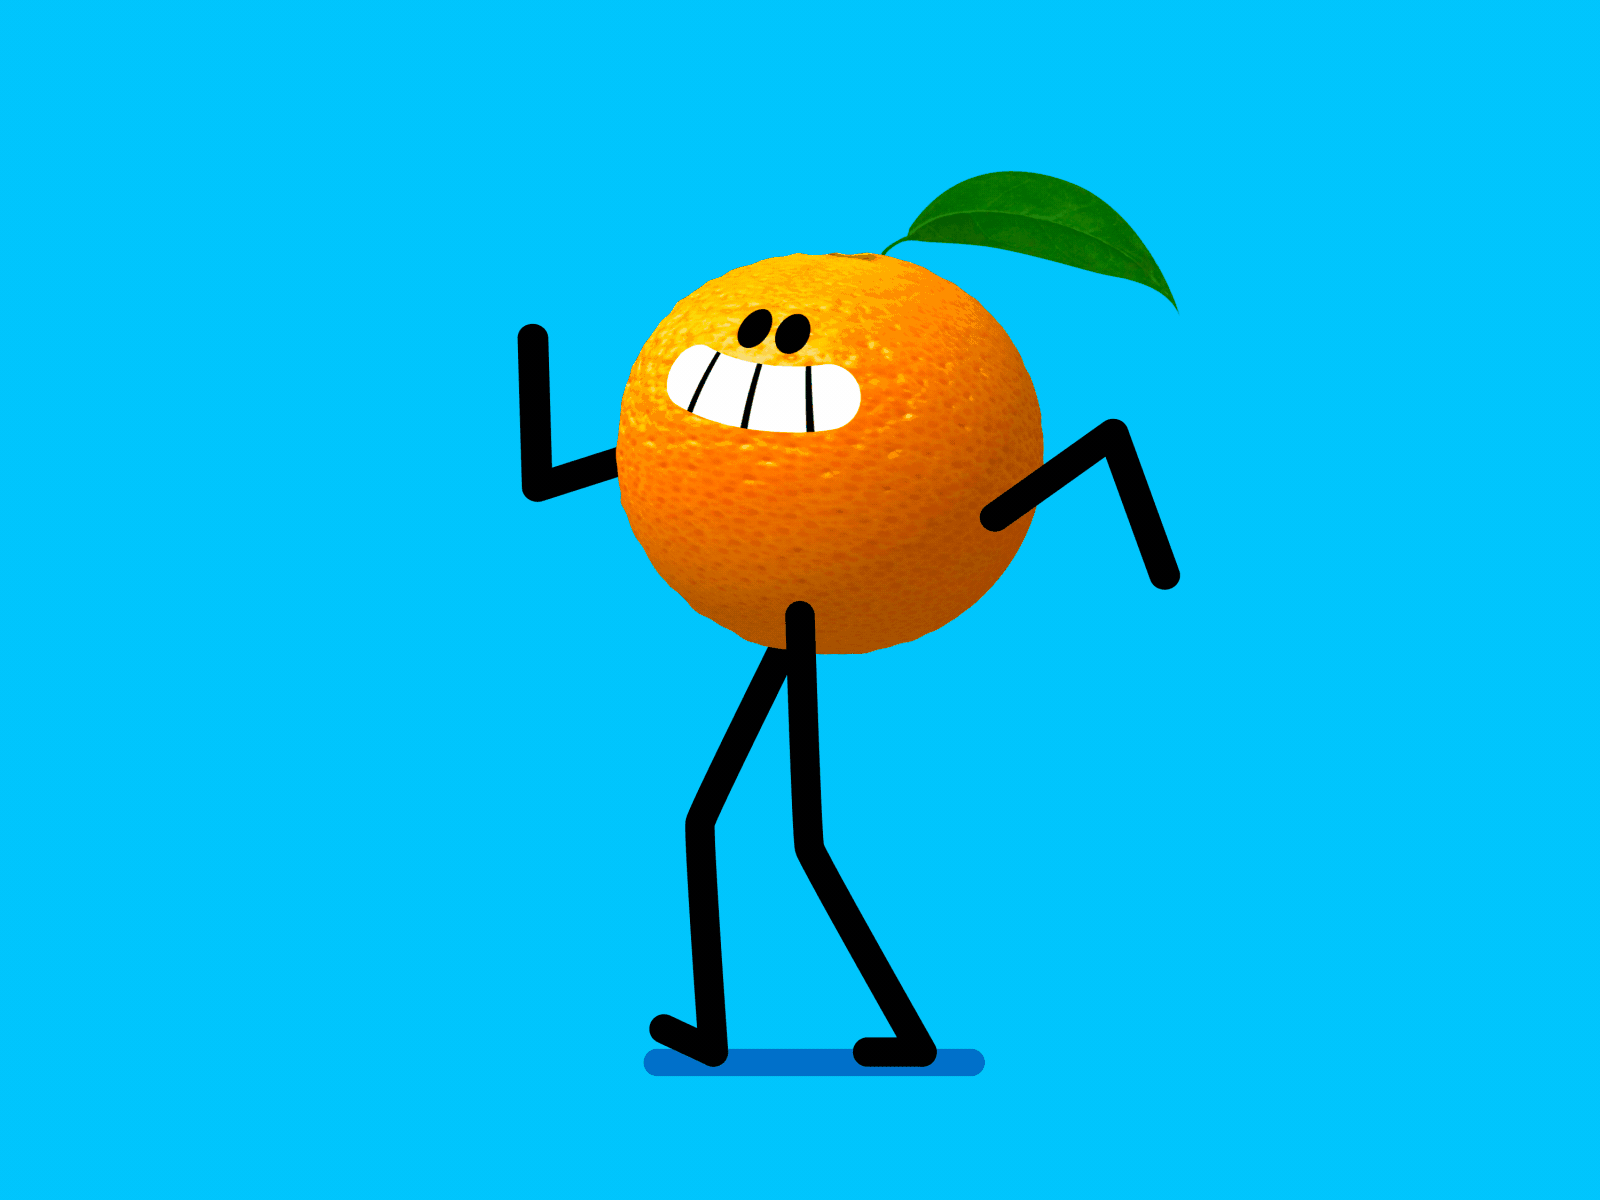 Exercise and Vitamin C 2d after effects aftereffects bouncy character cycle design illustration illustrator loop orange vector walk walkcycle